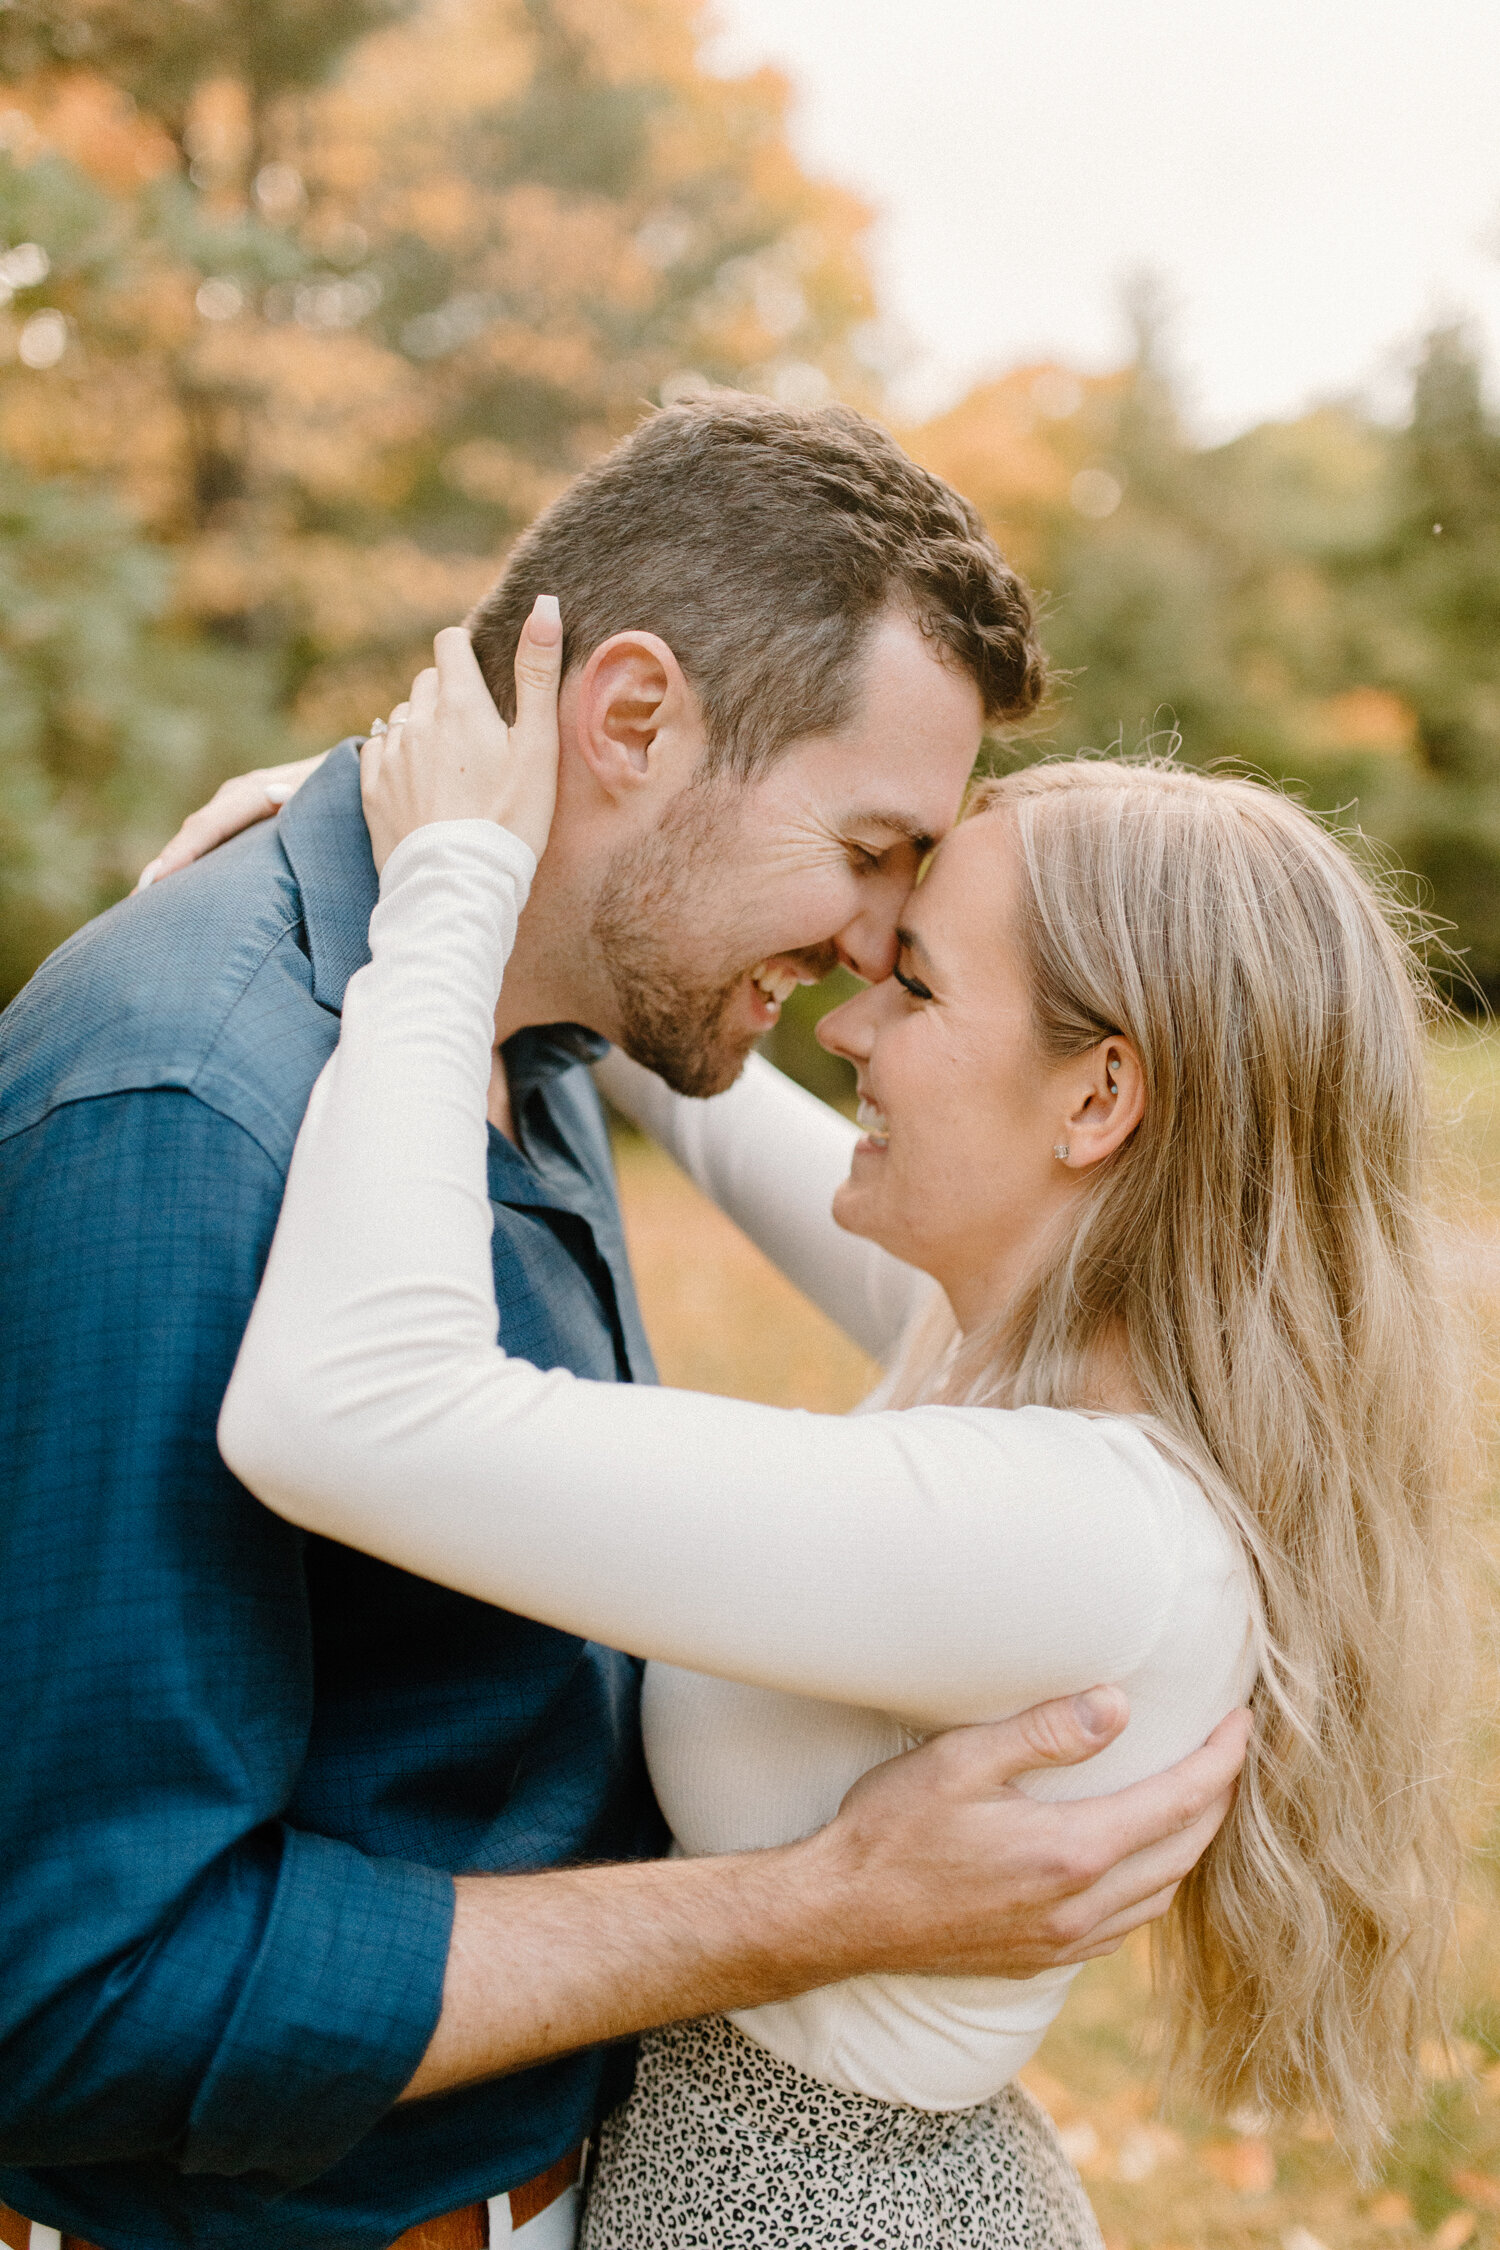  During this playful engagement session, Quebec, Canada photographer, Chelsea Mason Photography captures this couple laughing and pressing their foreheads together during an embrace. playful couple embrace, happy laughing couple engagement session, m